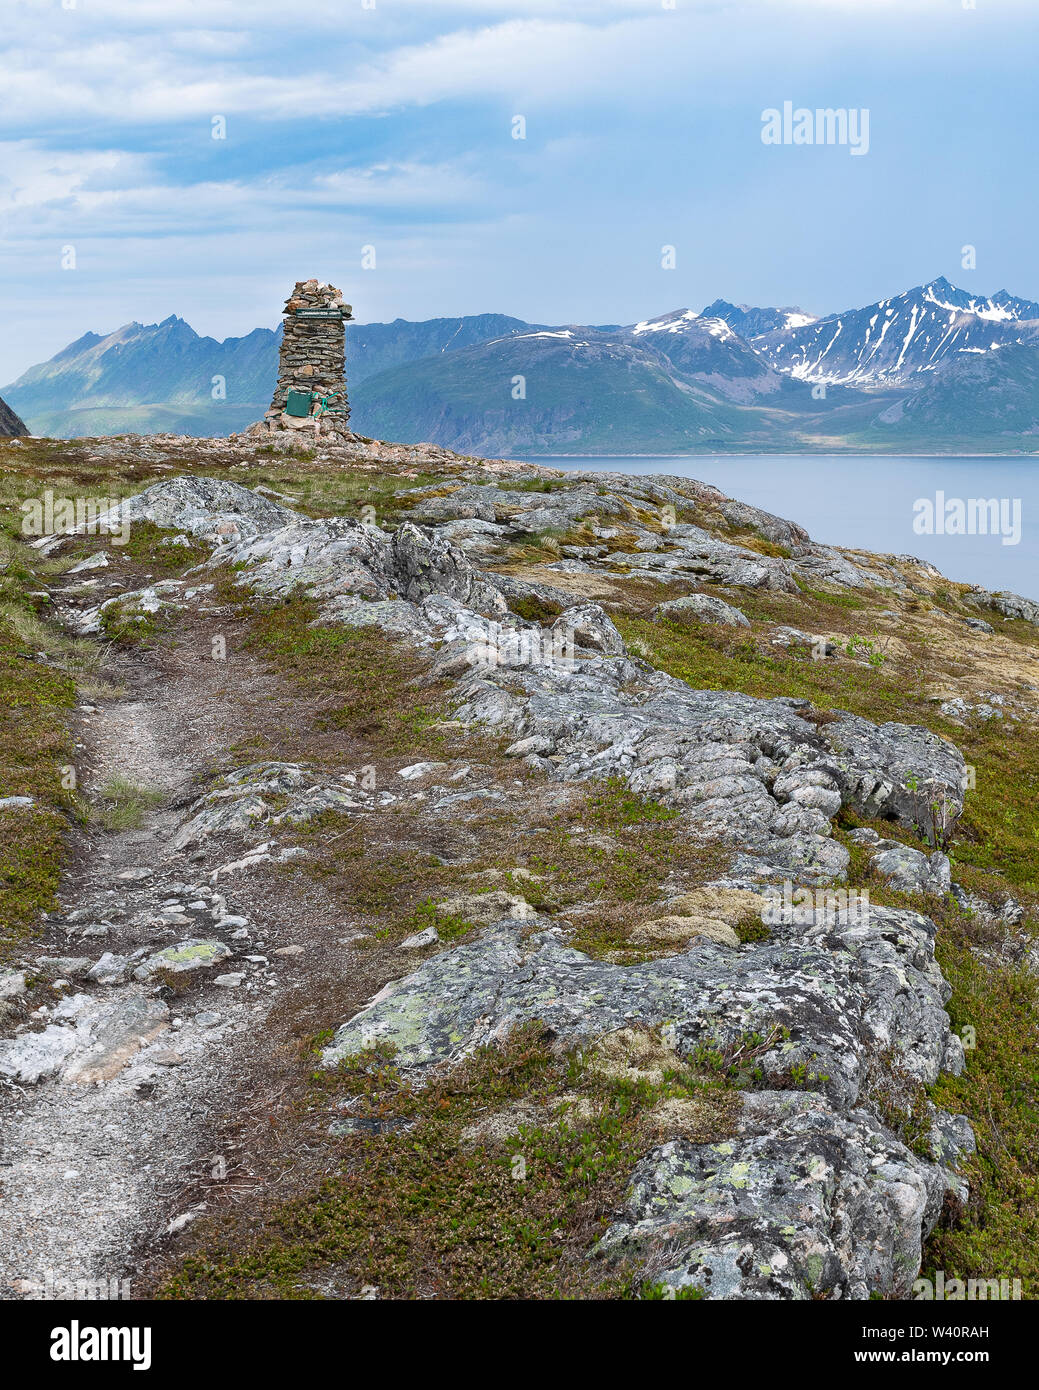 Visitors to the island of Senja in Norway can take a moderate hike to the top of Tonnerten near the town of Rodsandfor amazing mountain views. Stock Photo